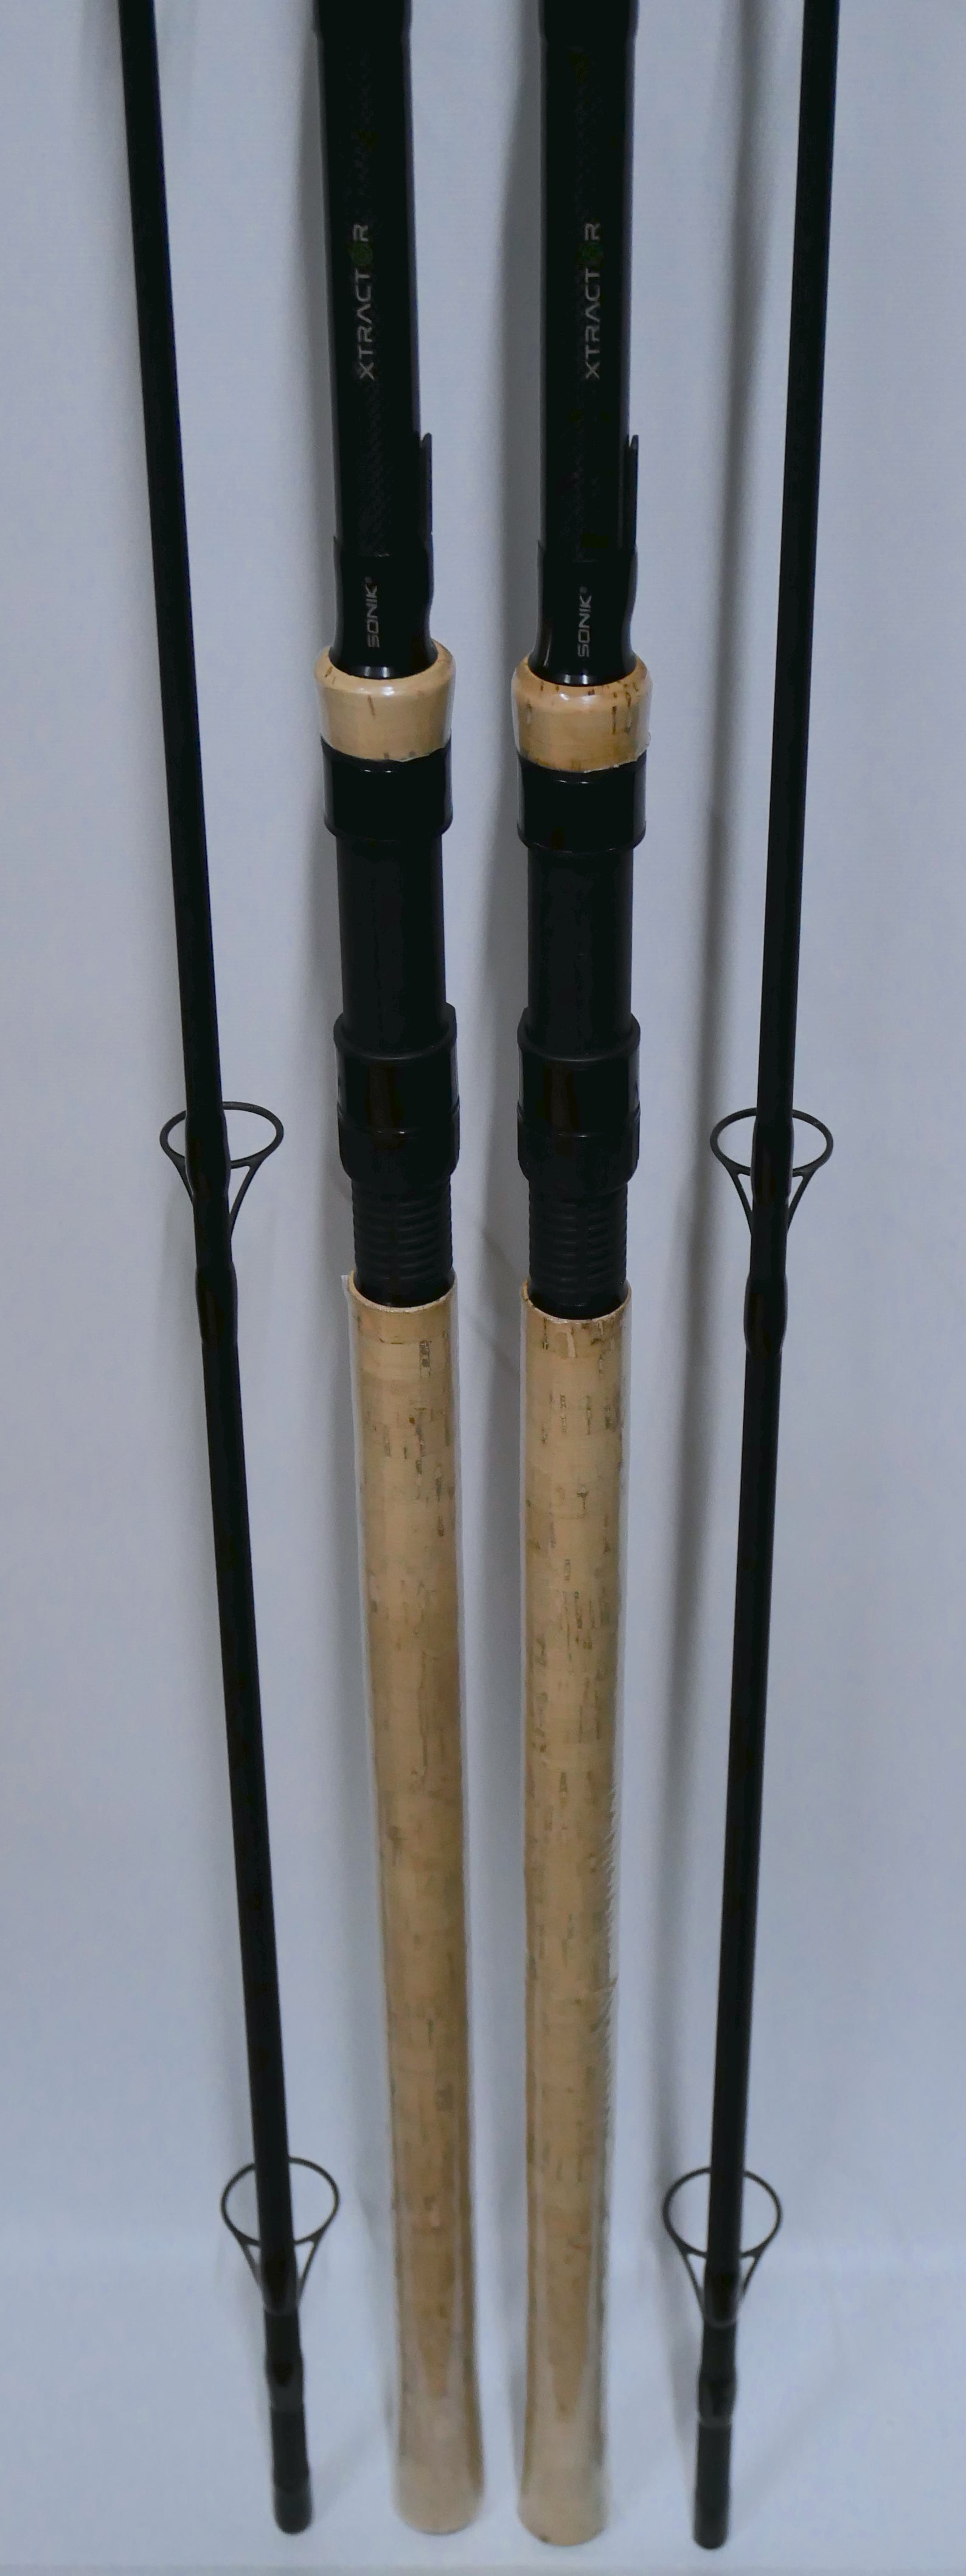 Sonik Xtractor Cork 10ft 3.25lb Rods X2 *Ex-Display* – Fish For Tackle